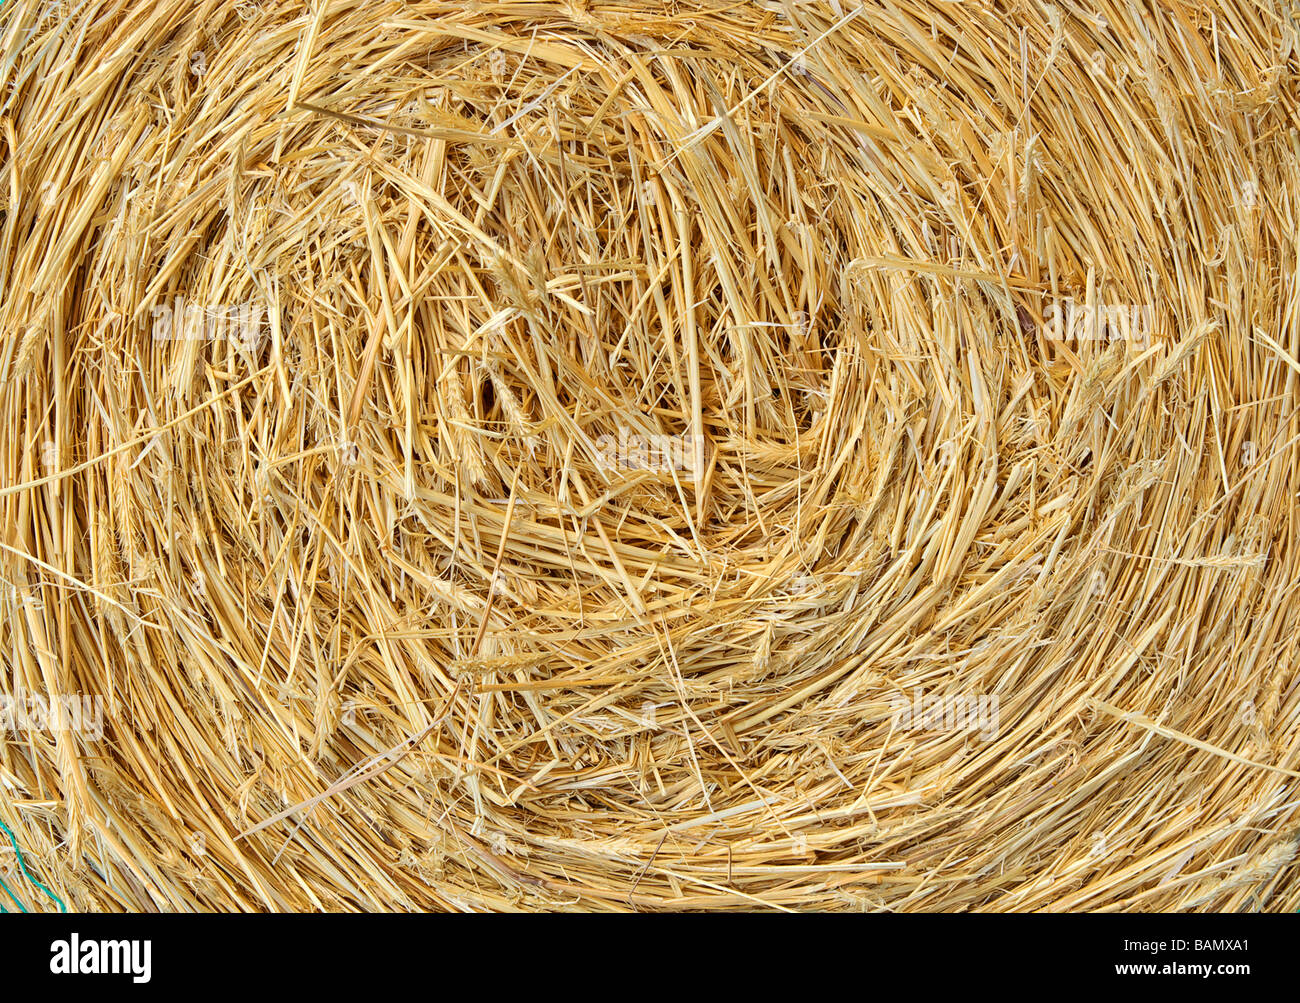 a big round bale of straw for stock feed Stock Photo